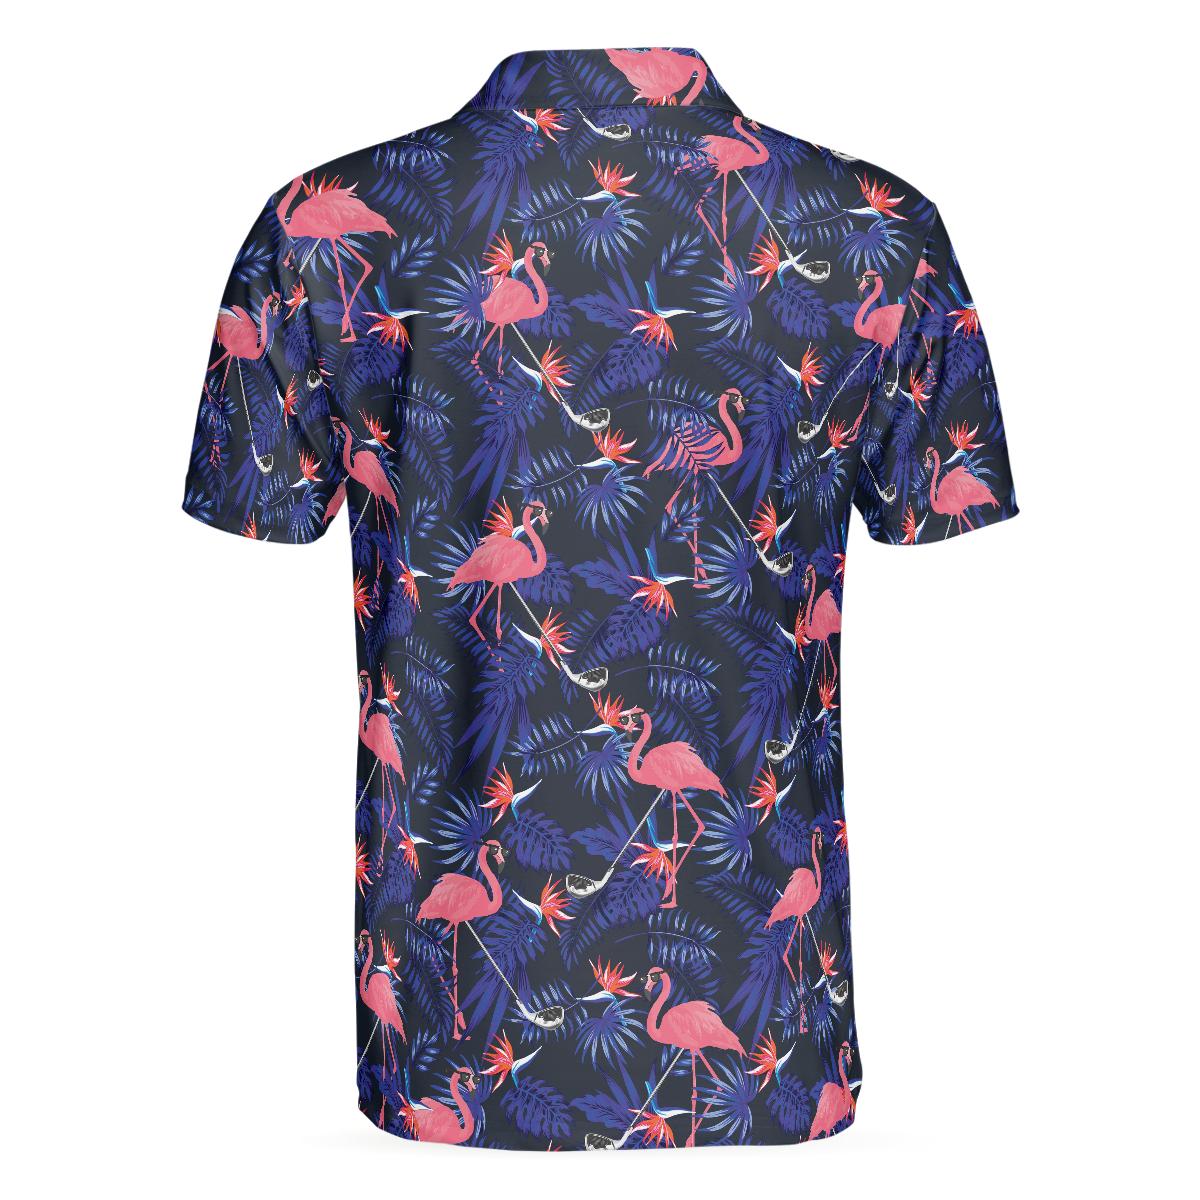 Flower And Flamingo Golf Polo Shirt Blue Flamingo Pattern Shirt For Golf Players Gift For Flamingo Fans - 2